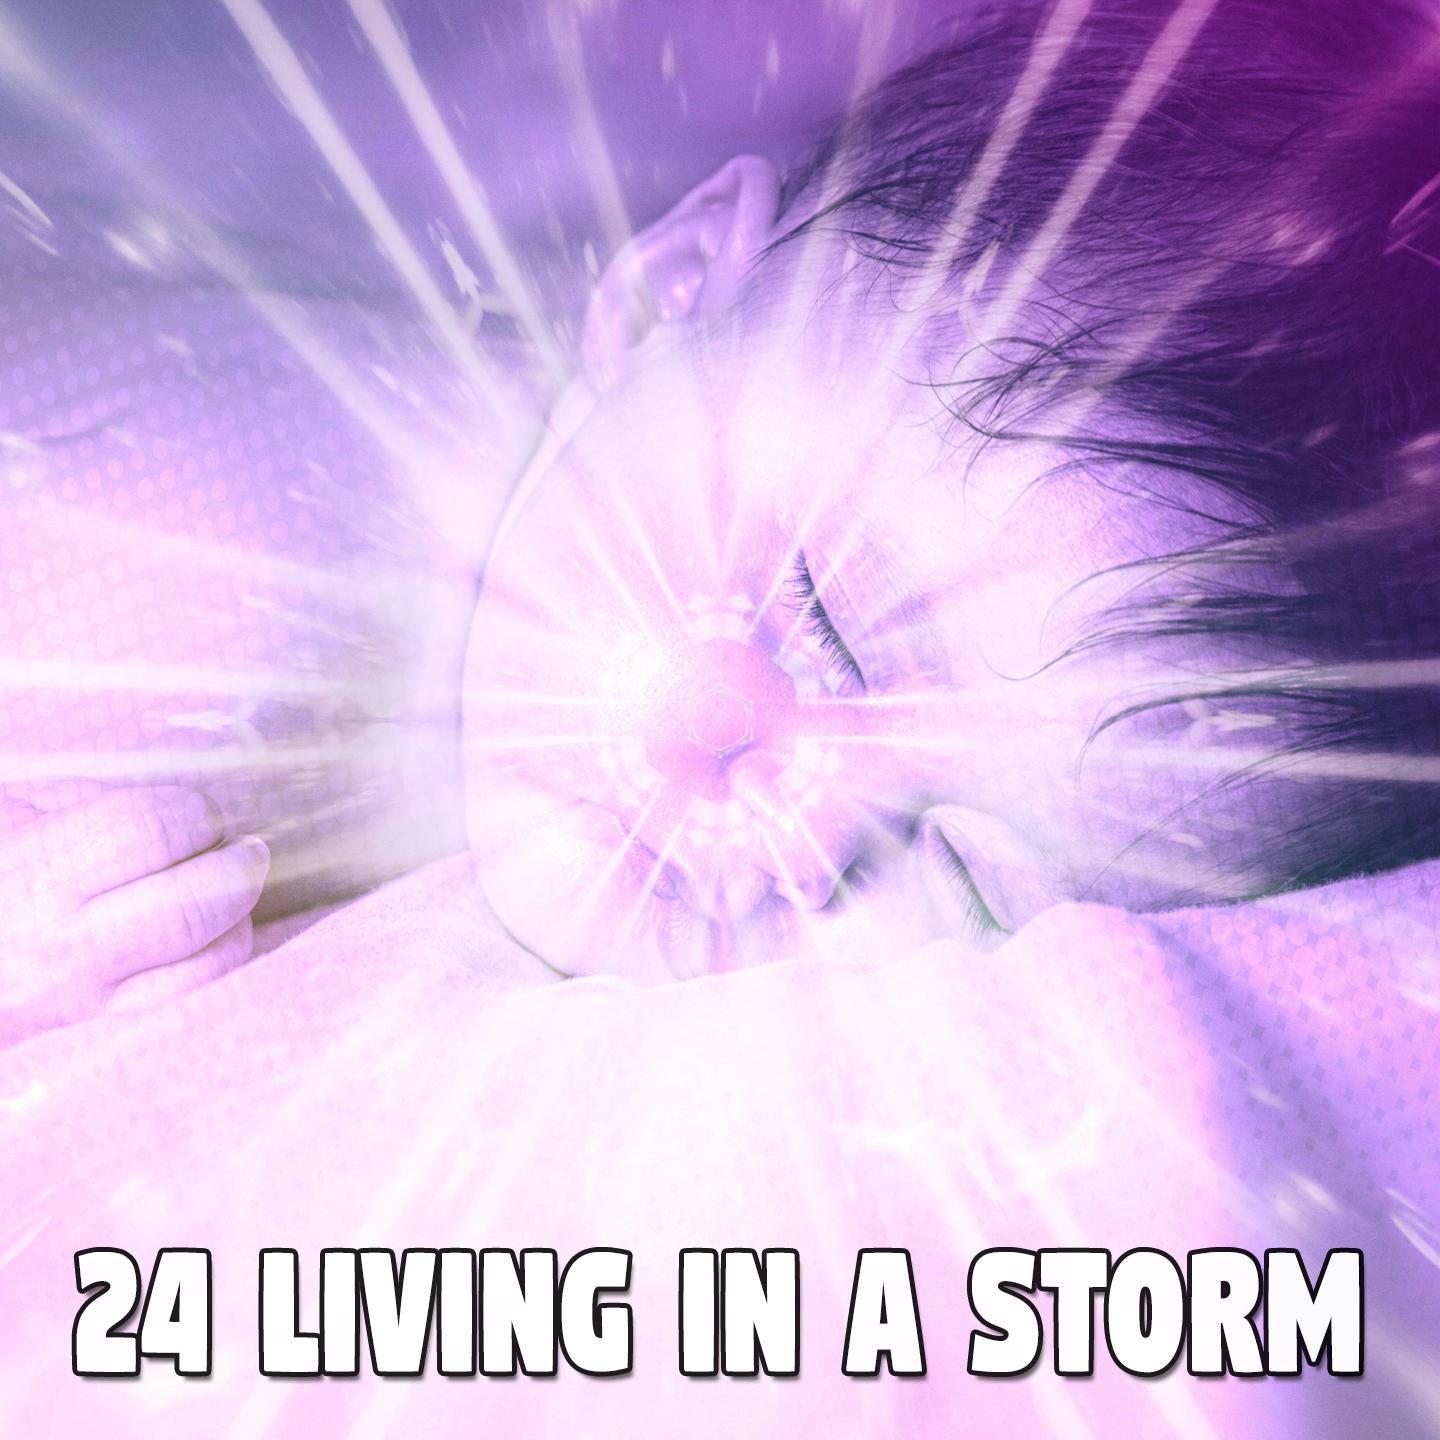 24 Living In a Storm